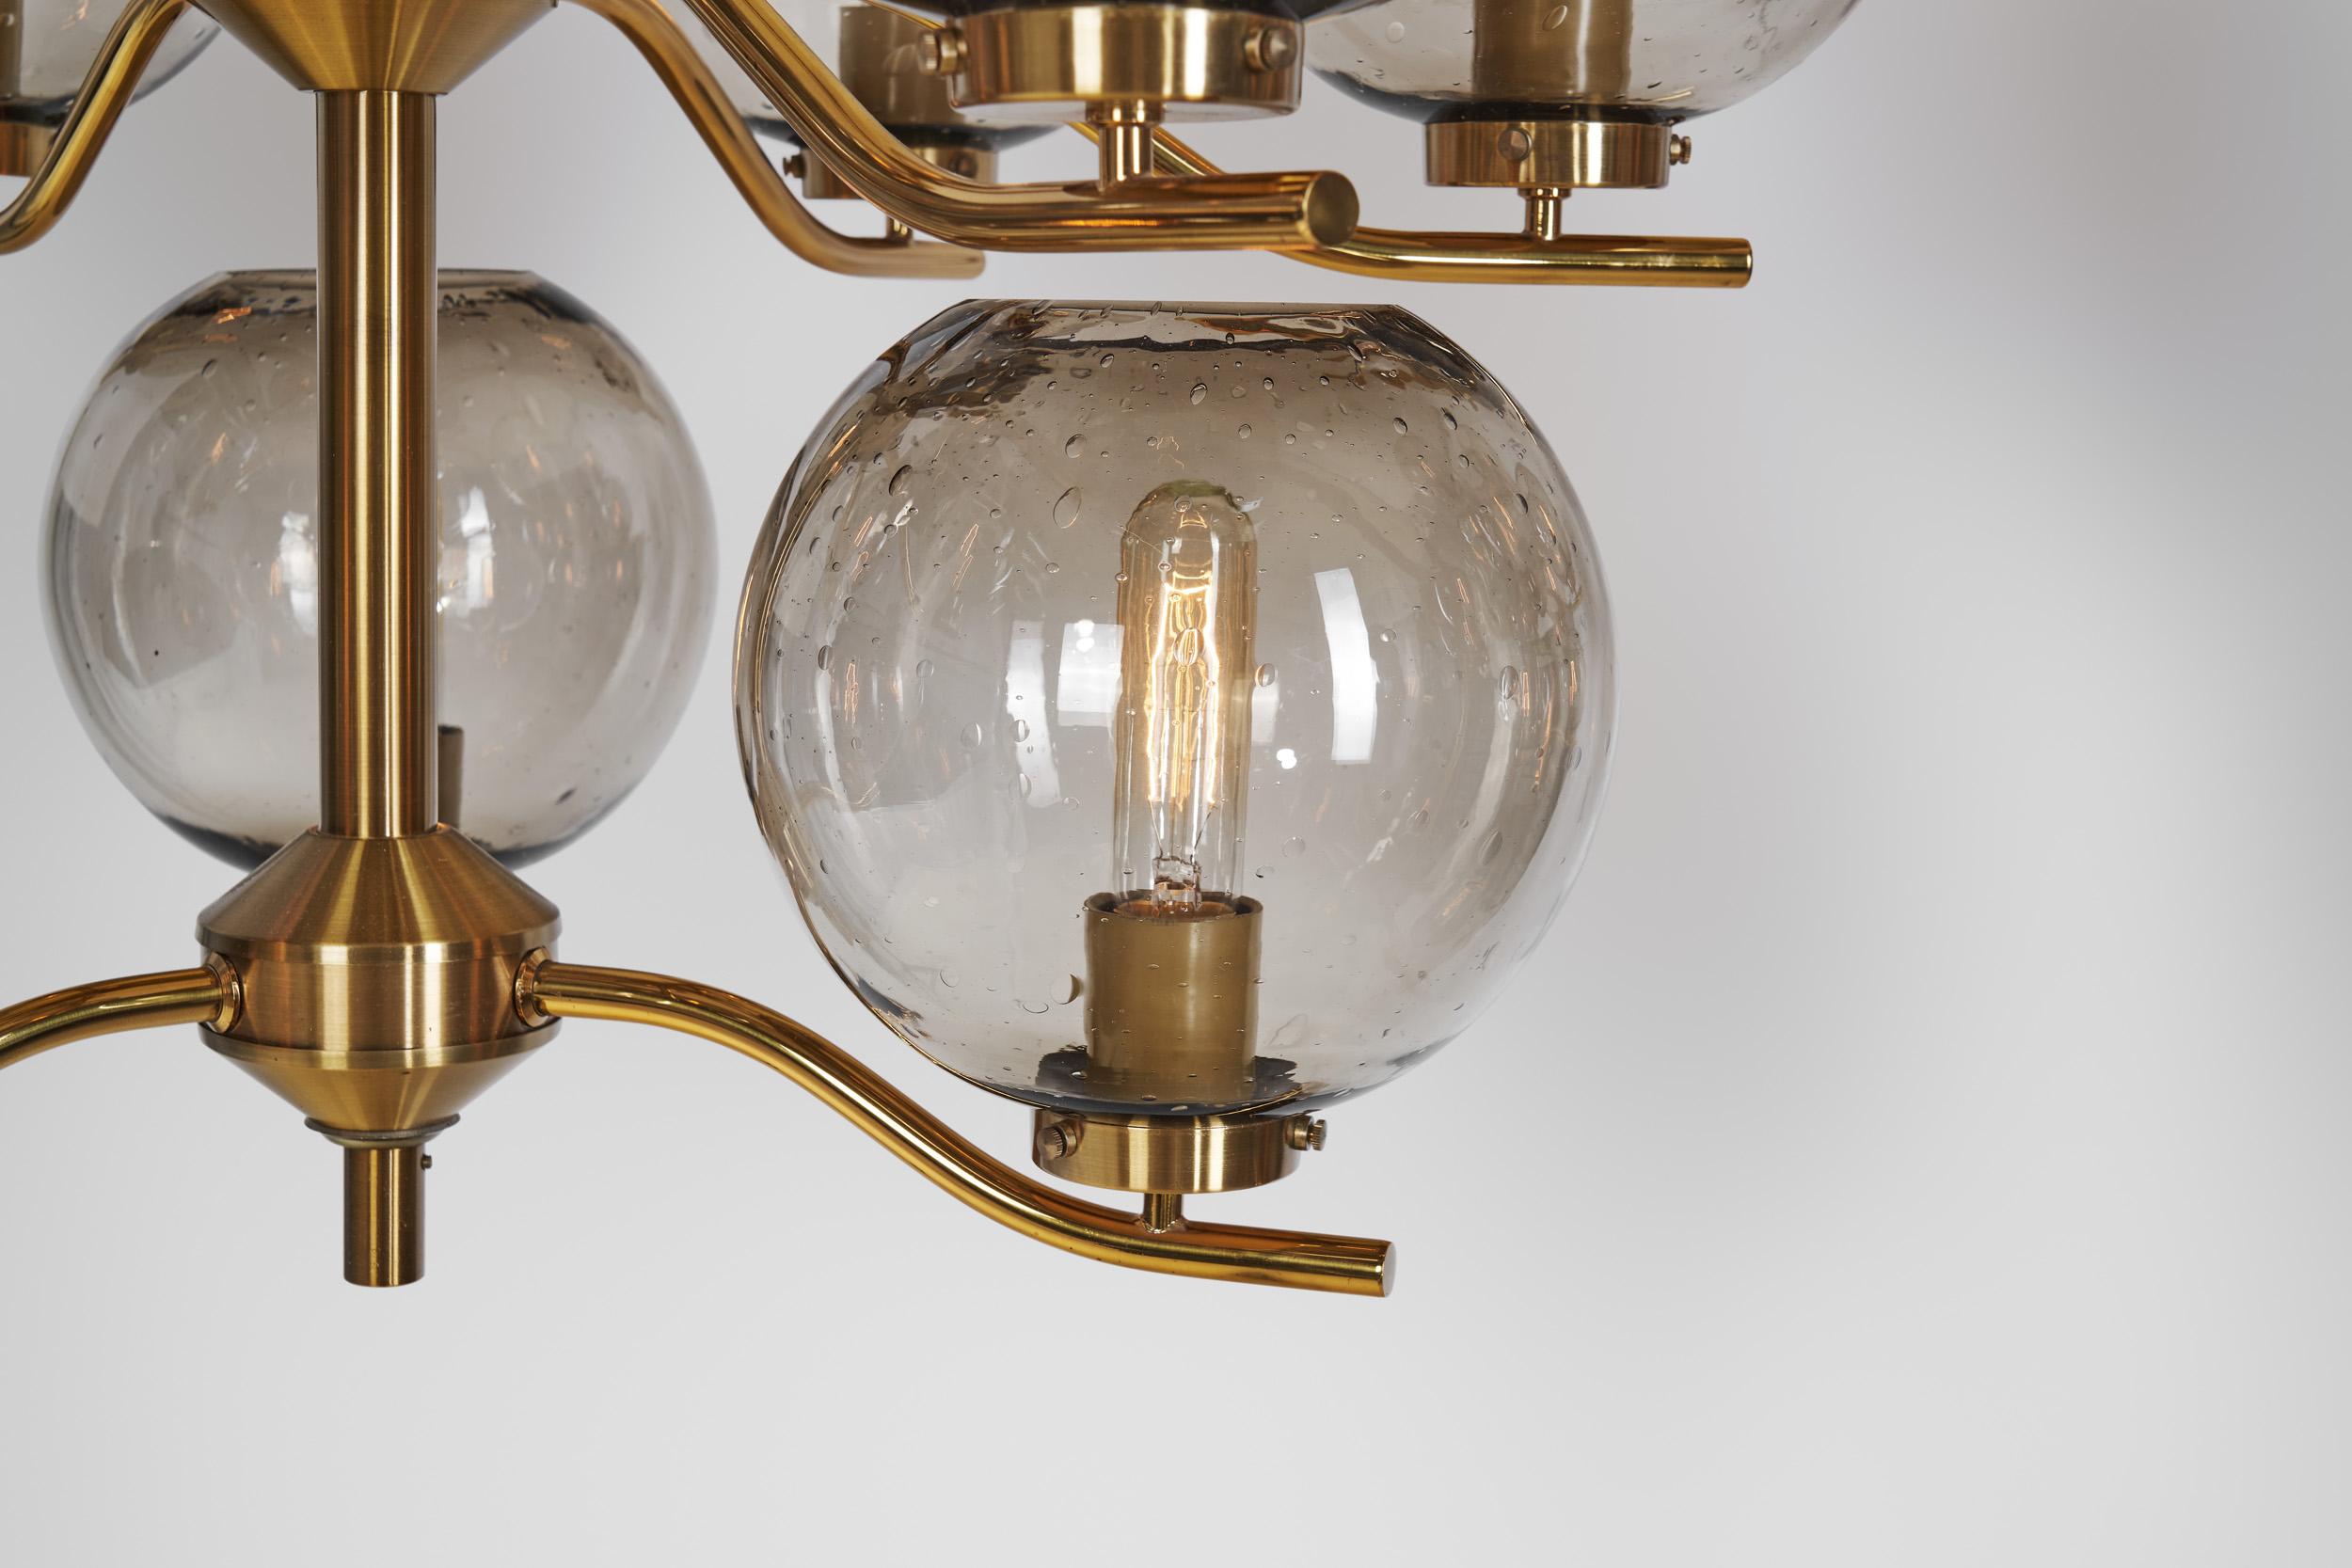 Holger Johansson Set of 6 Chandeliers with 12 Smoked Glass Shades, Sweden 1970s For Sale 8